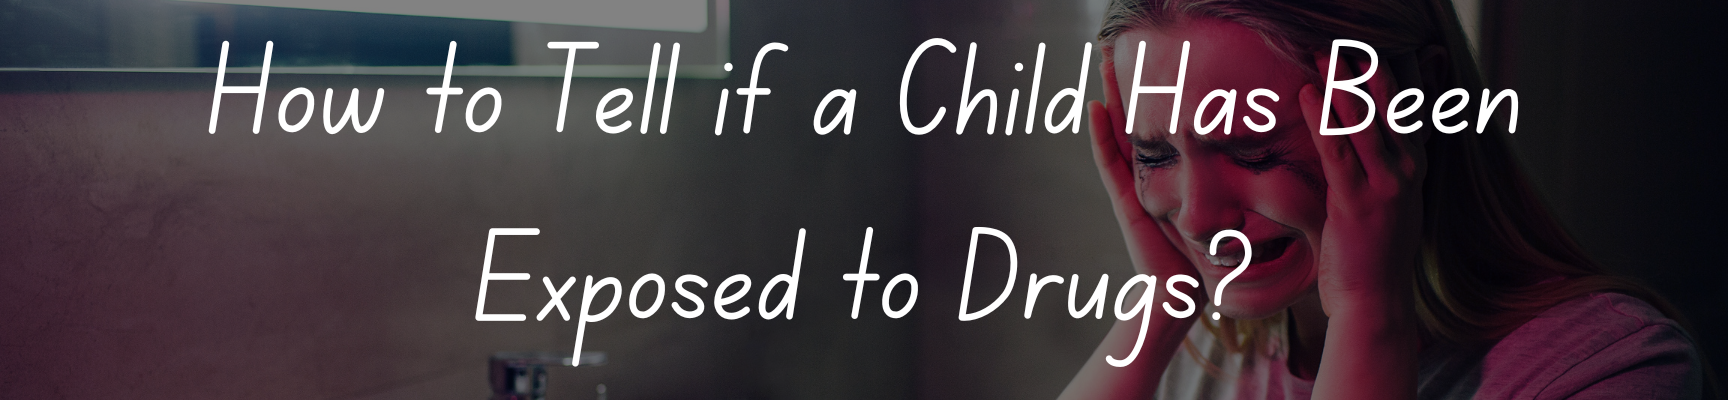 How to Tell if a Child Has Been Exposed to Drugs